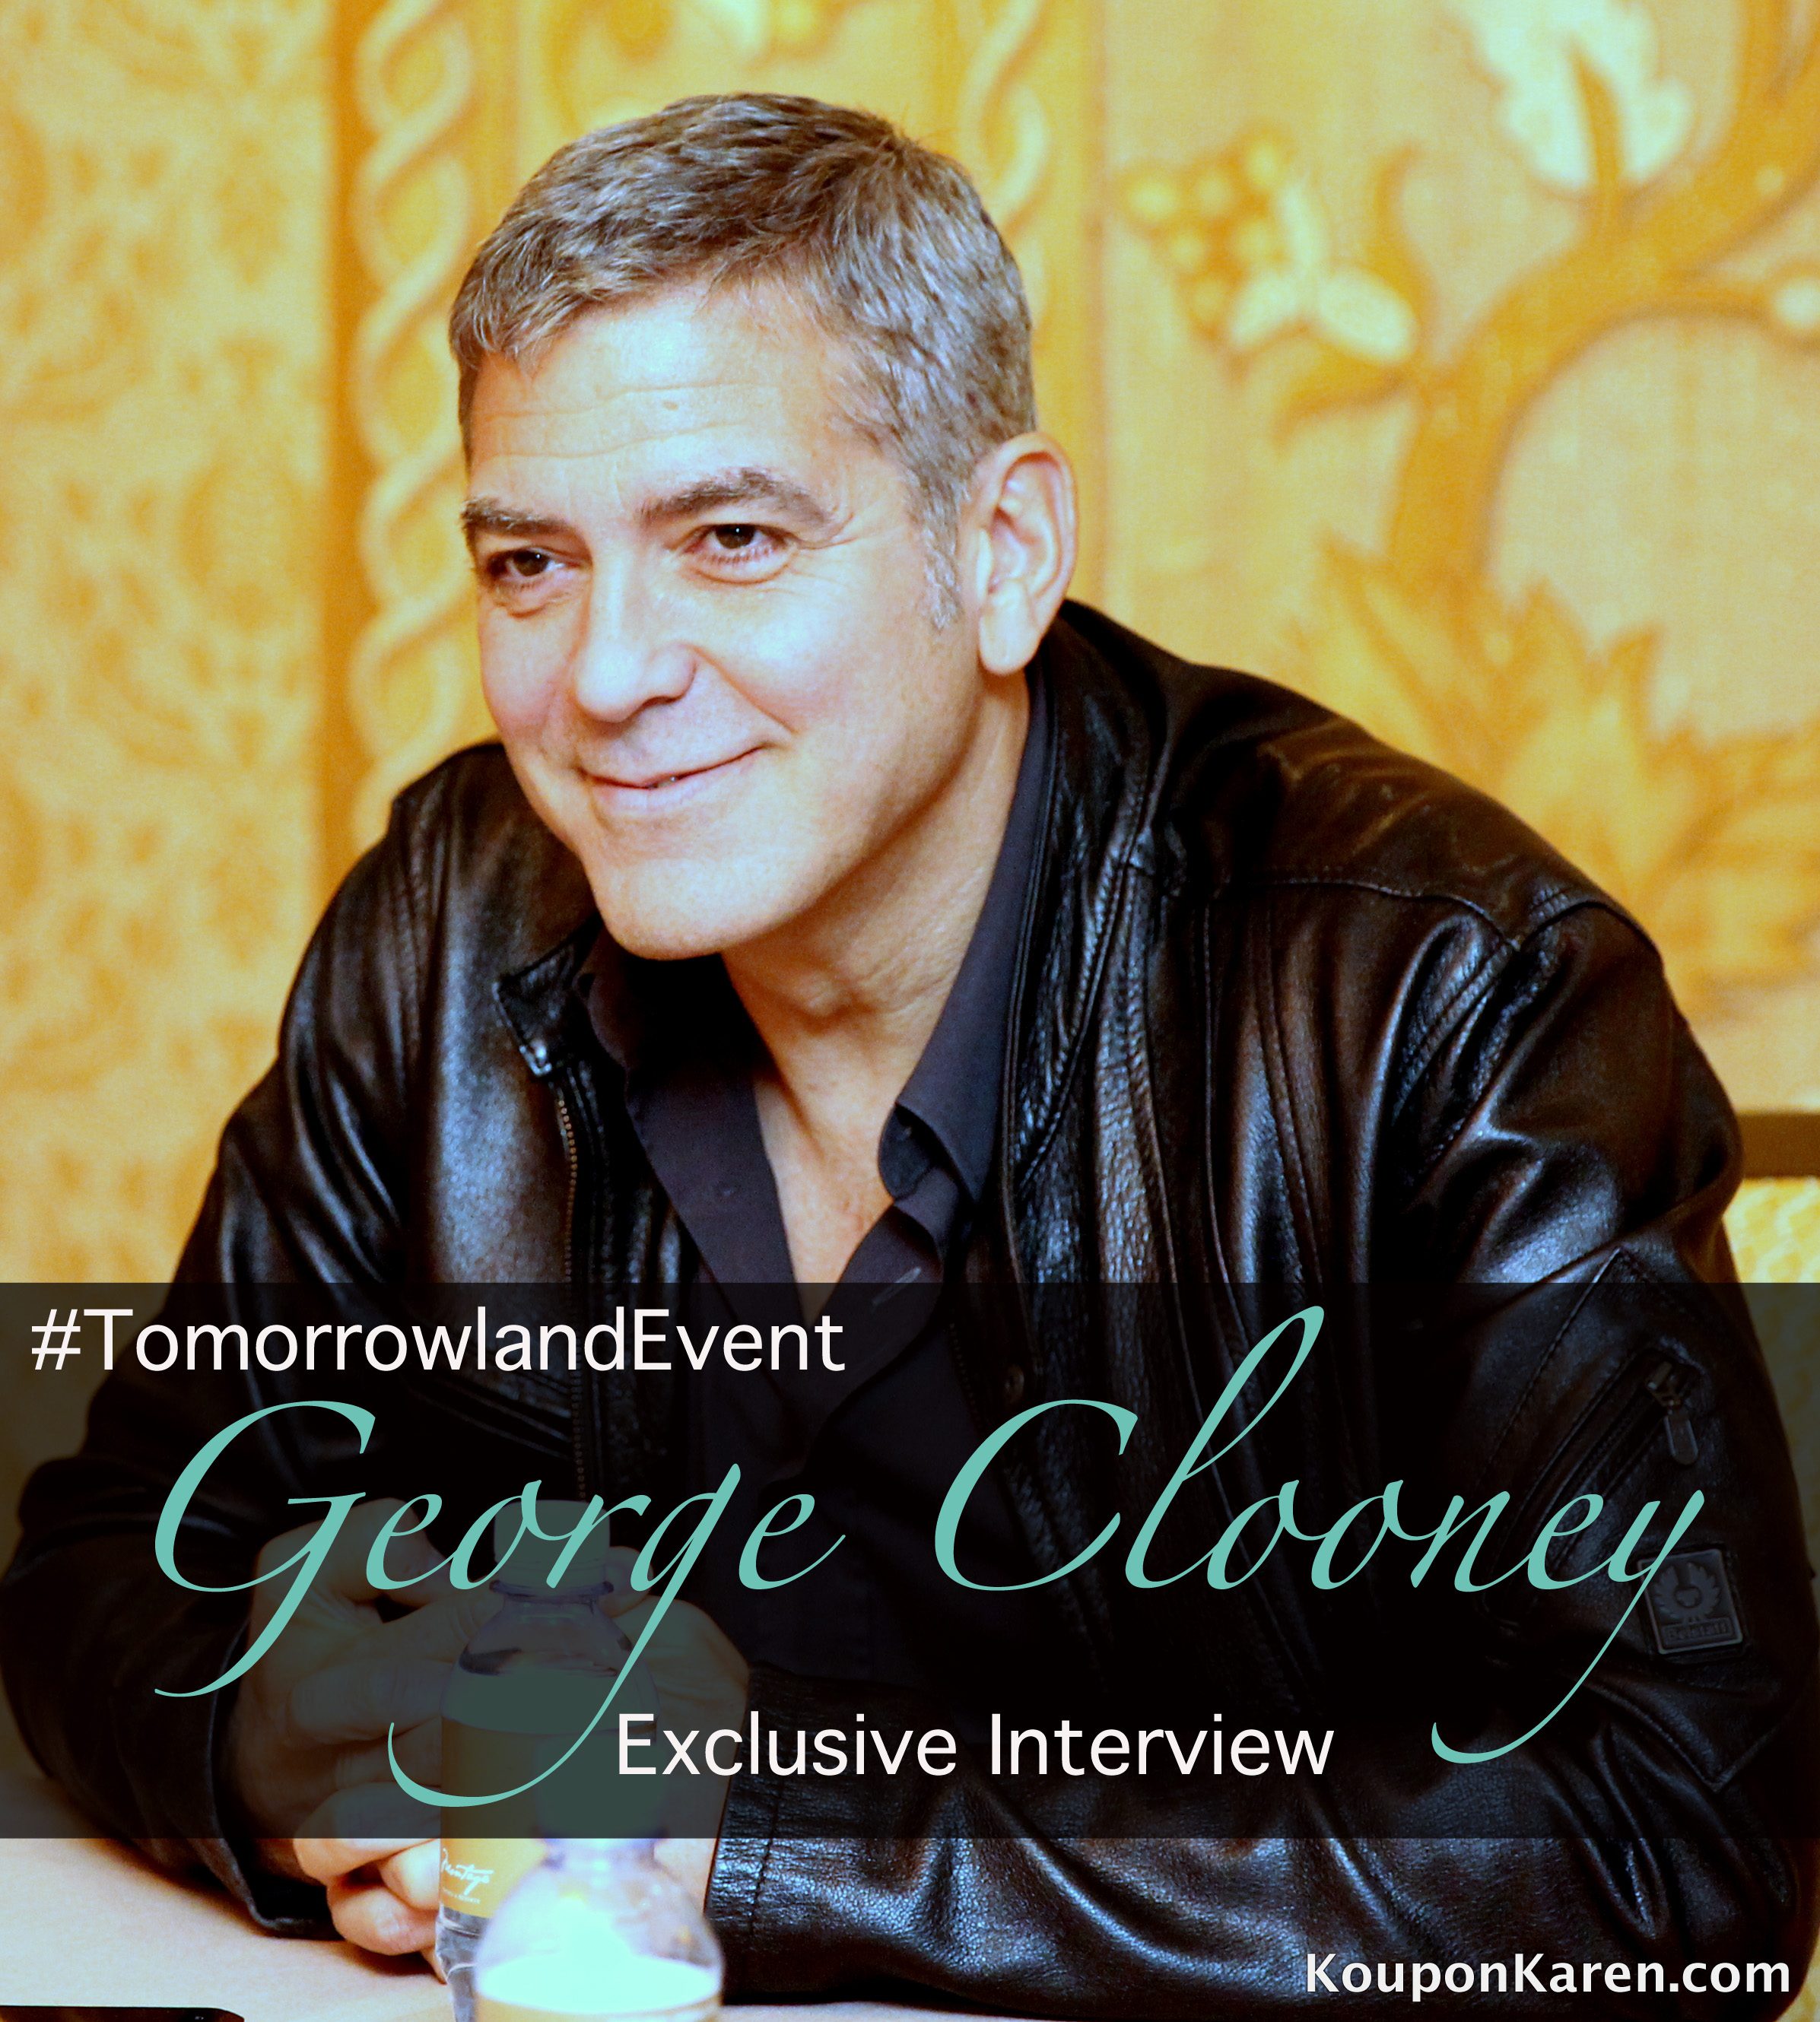 George Clooney Talks About Working with Younger Actors #TomorrowlandEvent